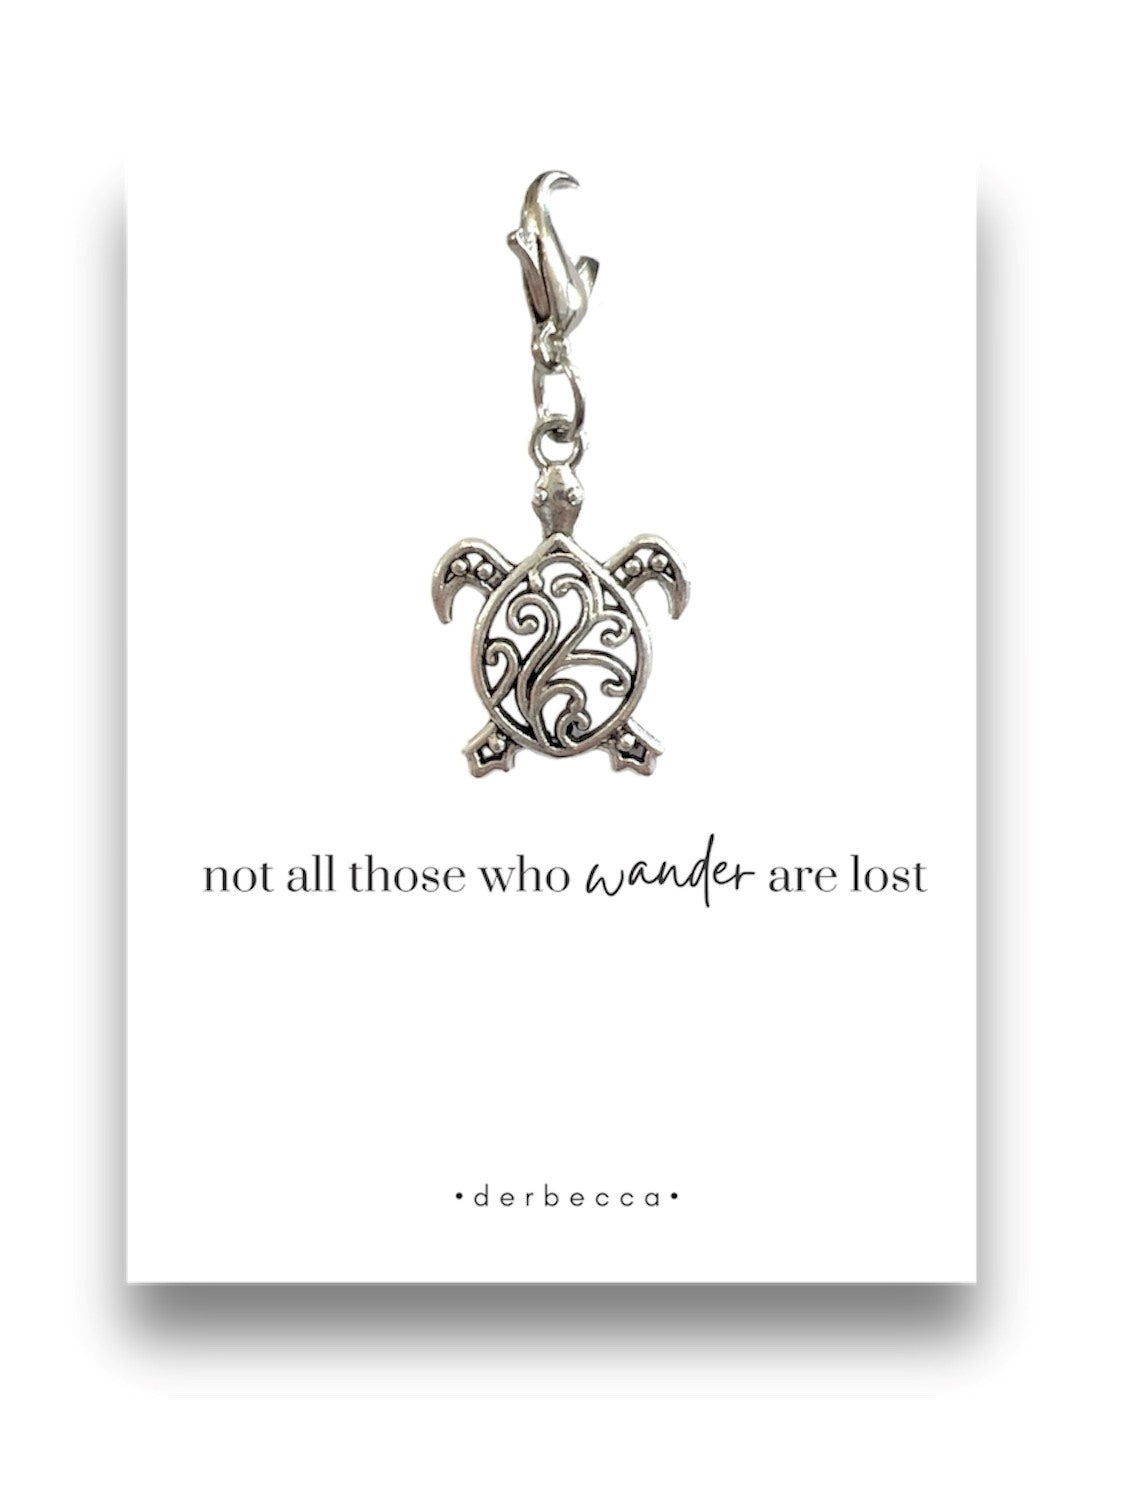 Scroll Sea Turtle Pendant Charm with Lobster Claw Clasp and Pem/Saying Verse card that reads "not all those who wander are lost"